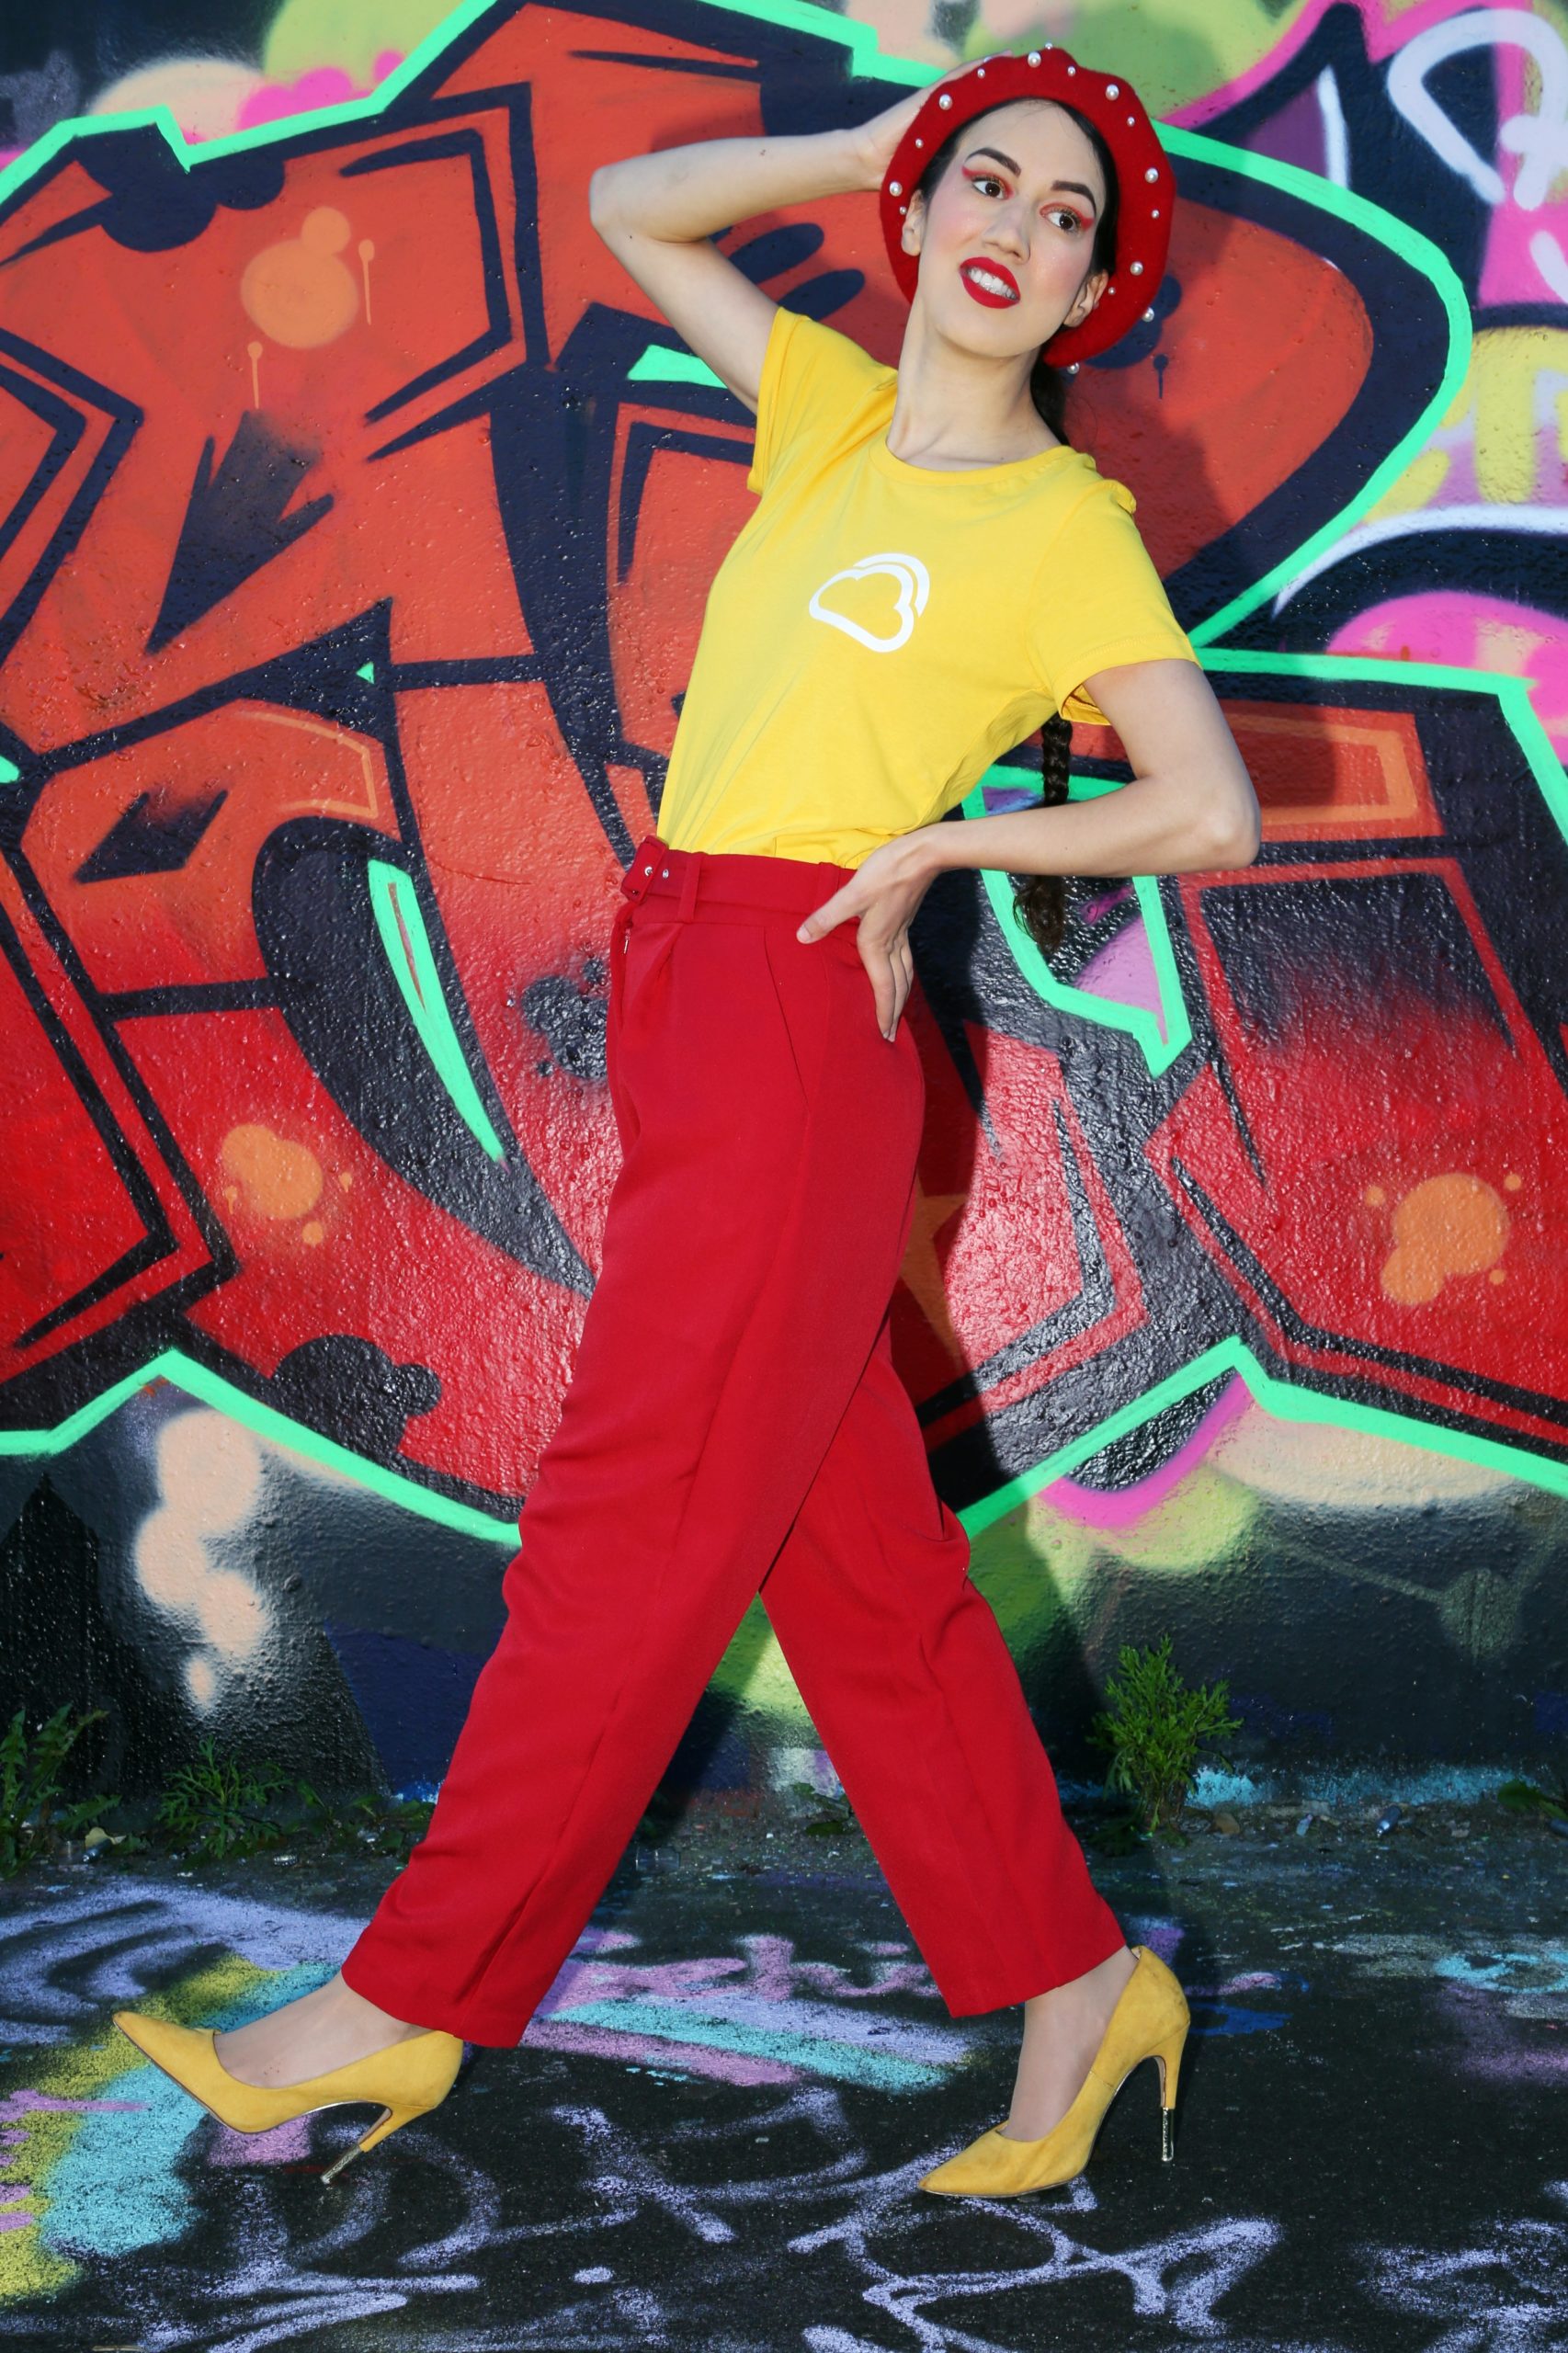 <img src="ana.jpg" alt="ana in red pearl beret and yellow top"/> 